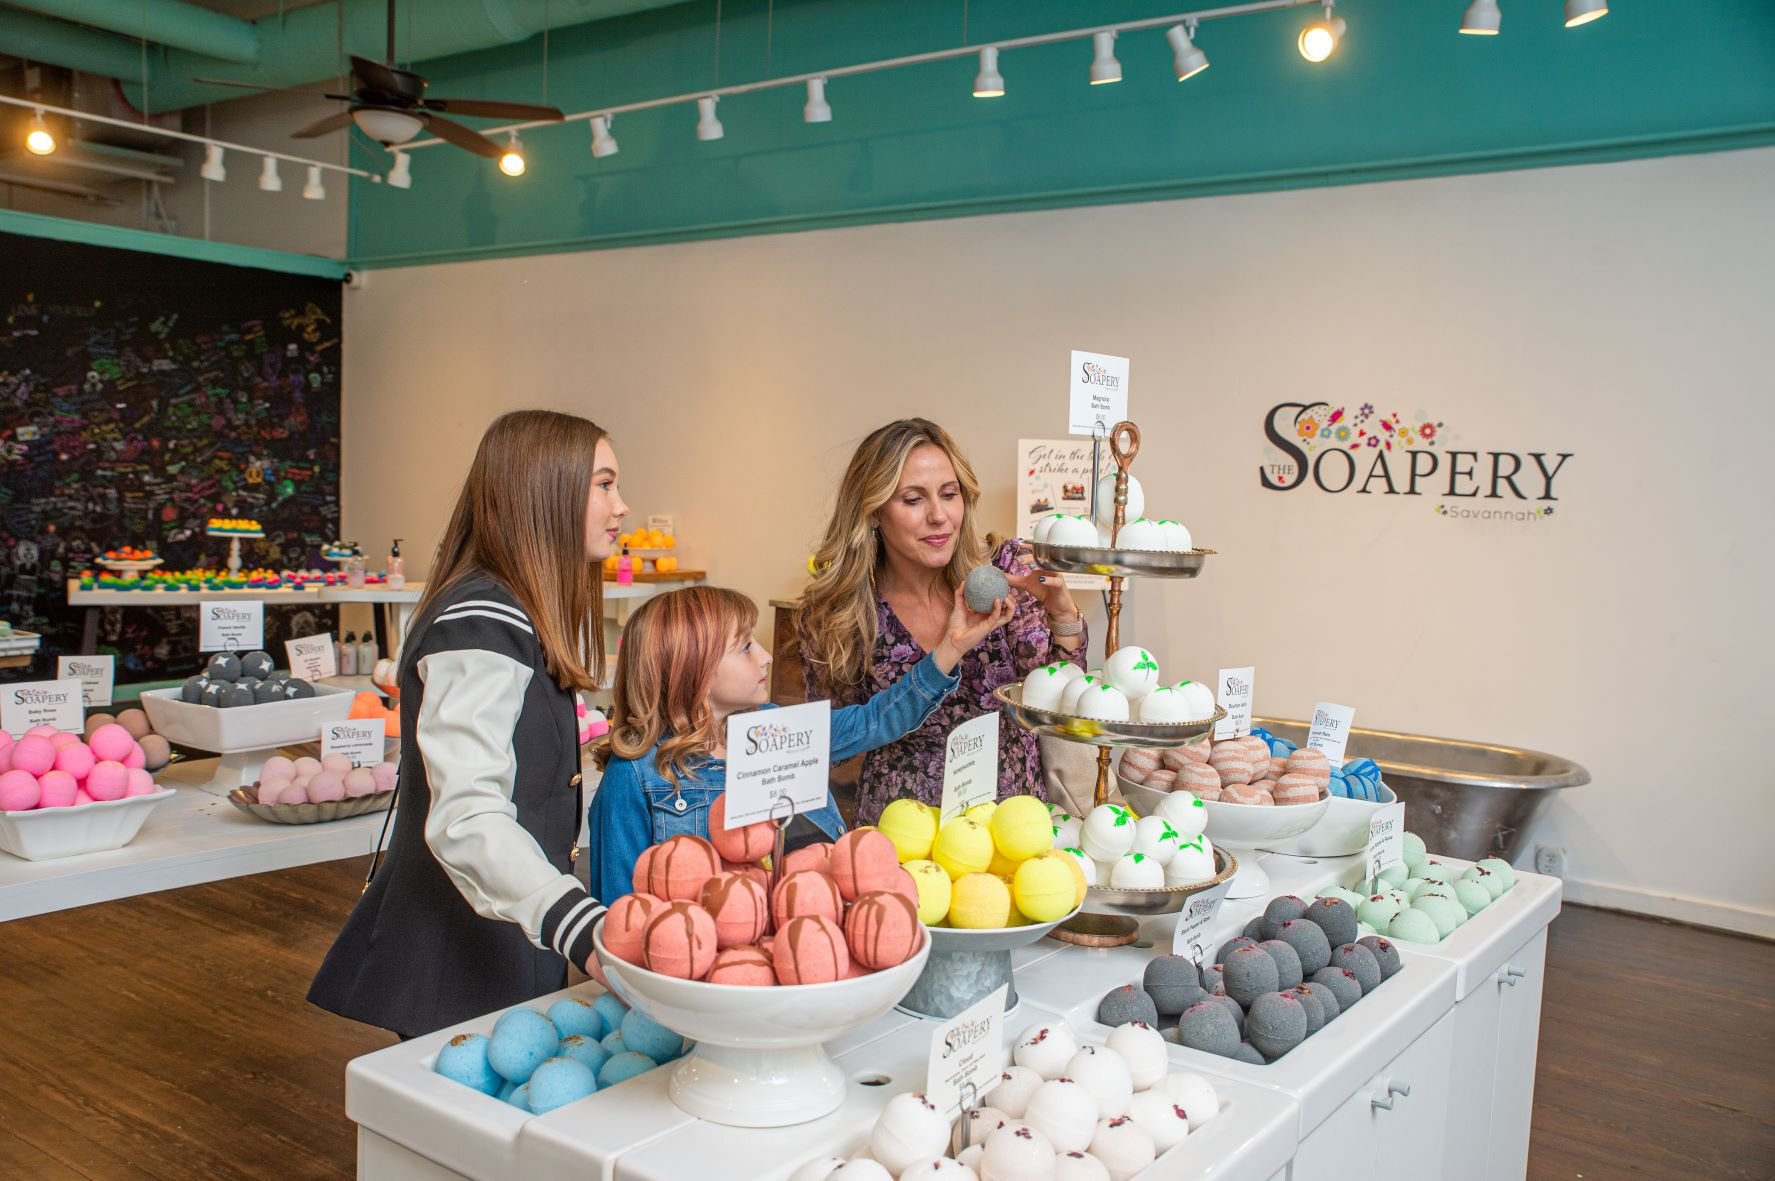 The Soapery USA